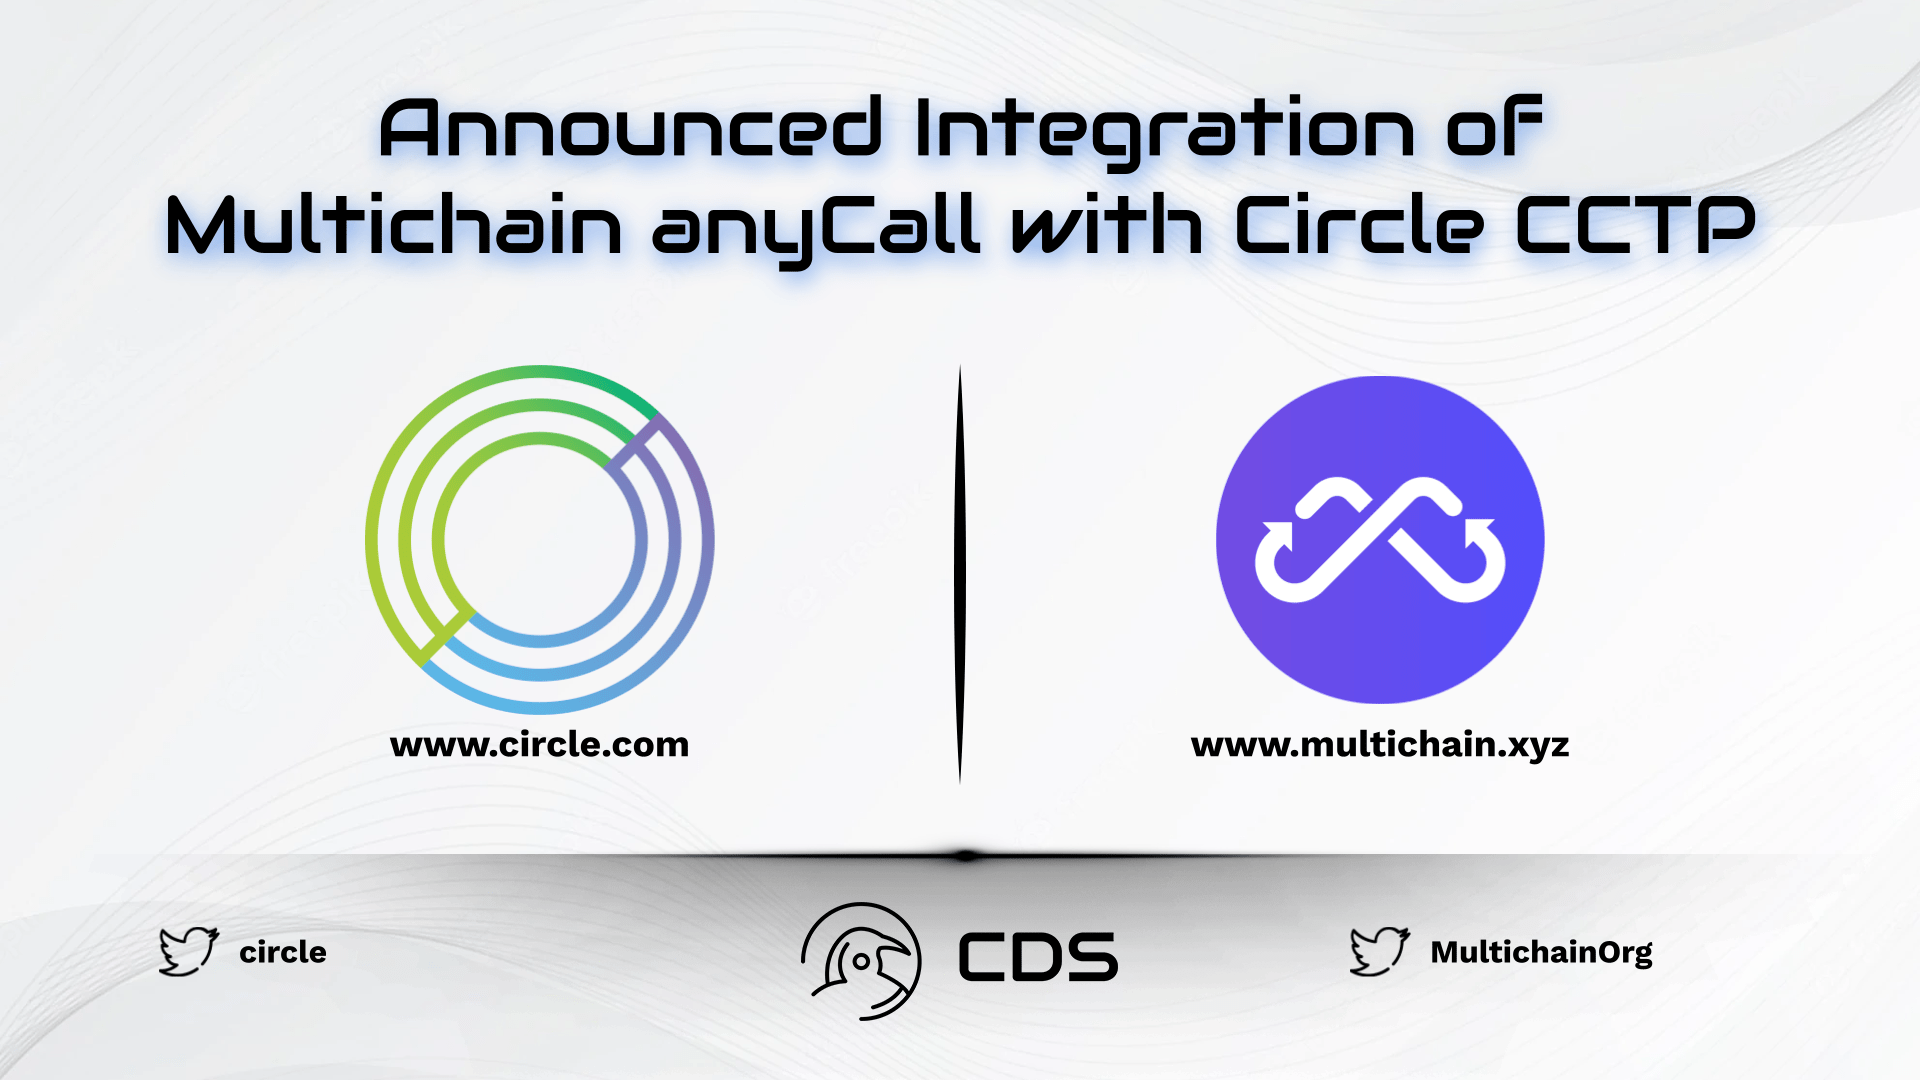 Announced Integration of Multichain anyCall with Circle CCTP